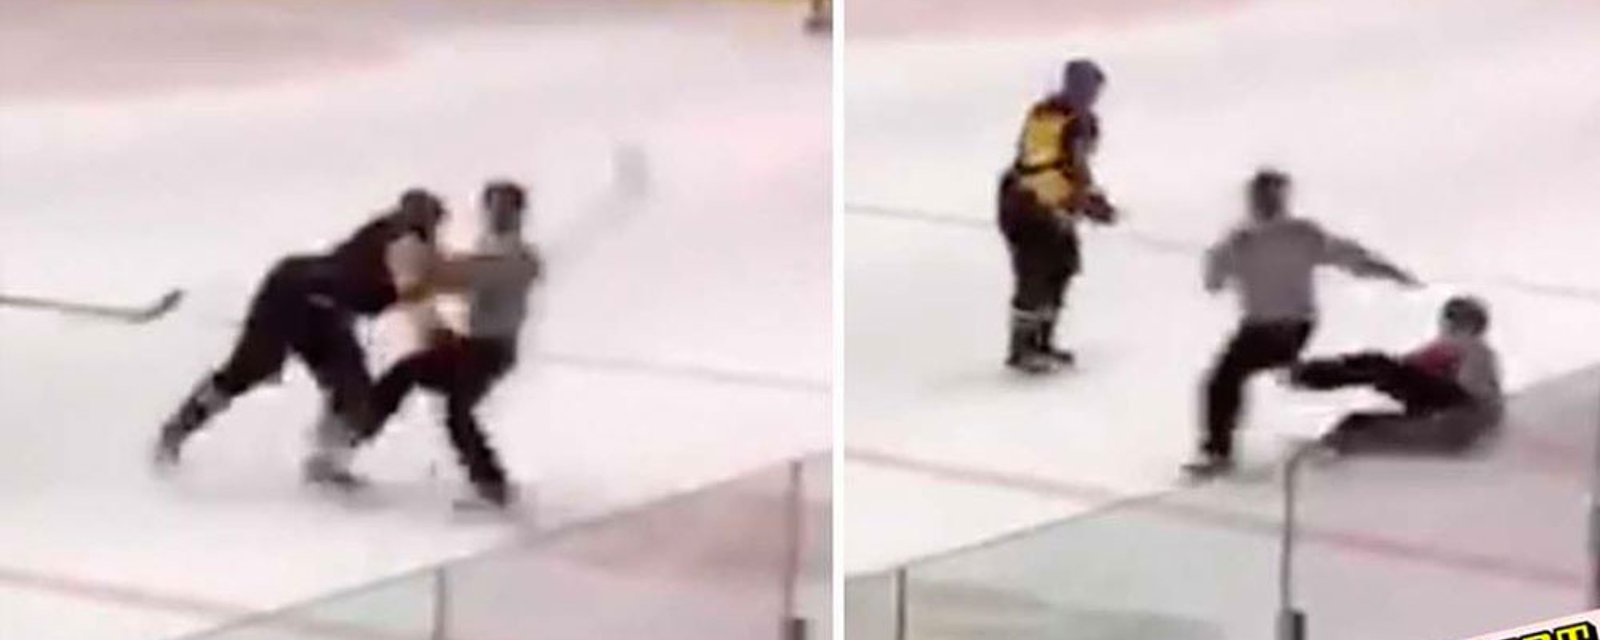 Swedish league player receives two year suspension after cross-checking referee